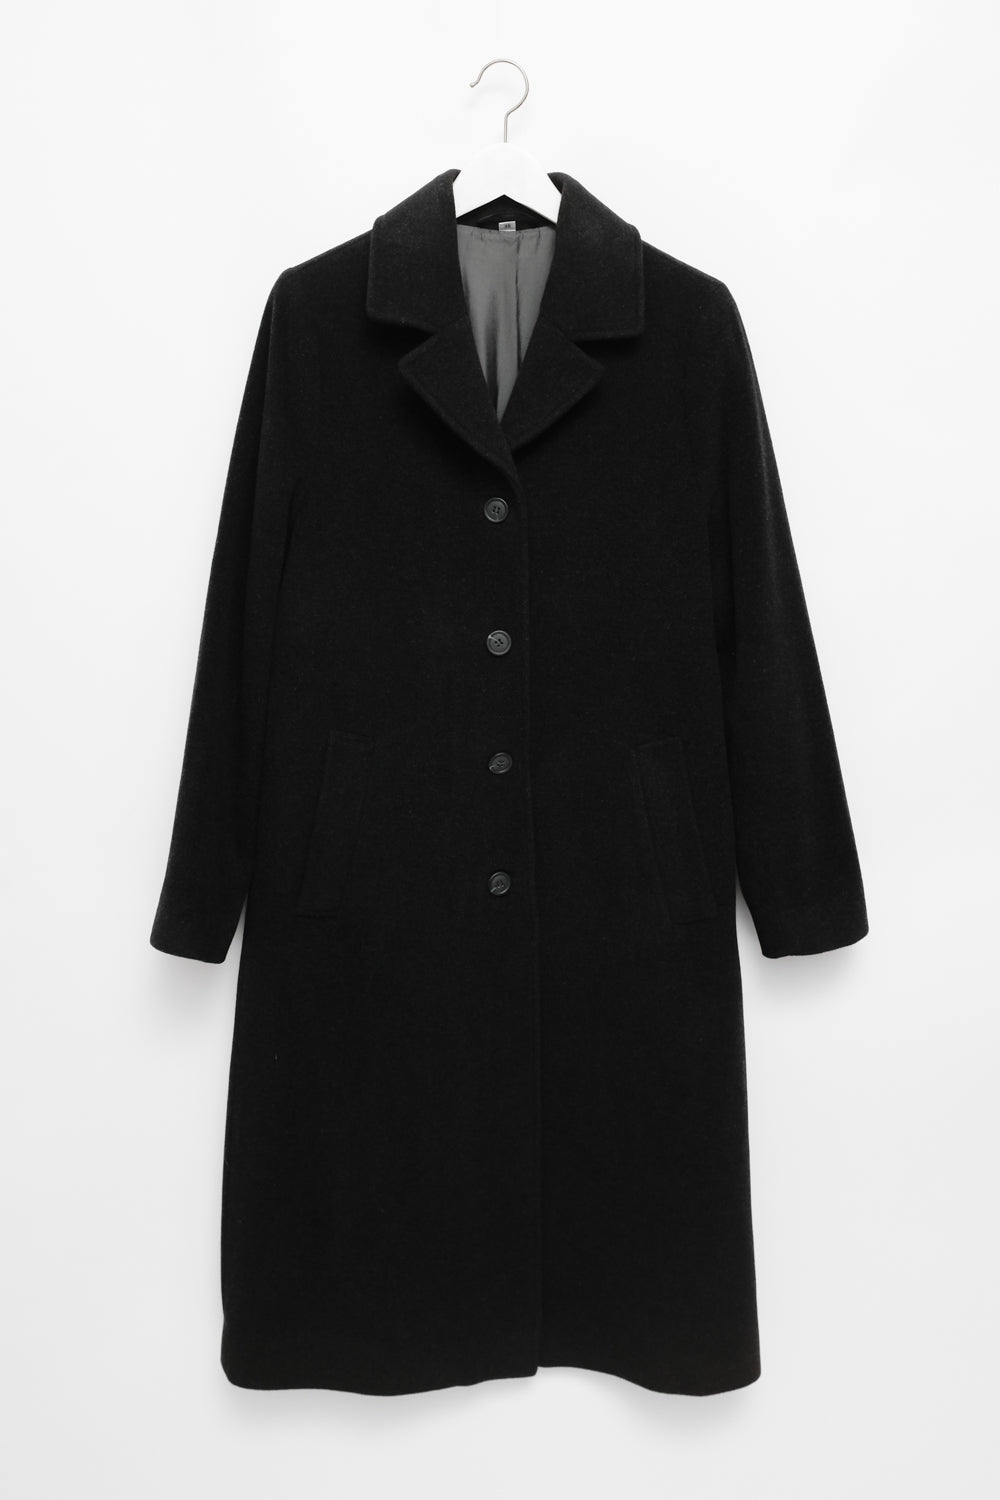 CLASSY WOOL CASHMERE ANTHRACITE VINTAGE COAT